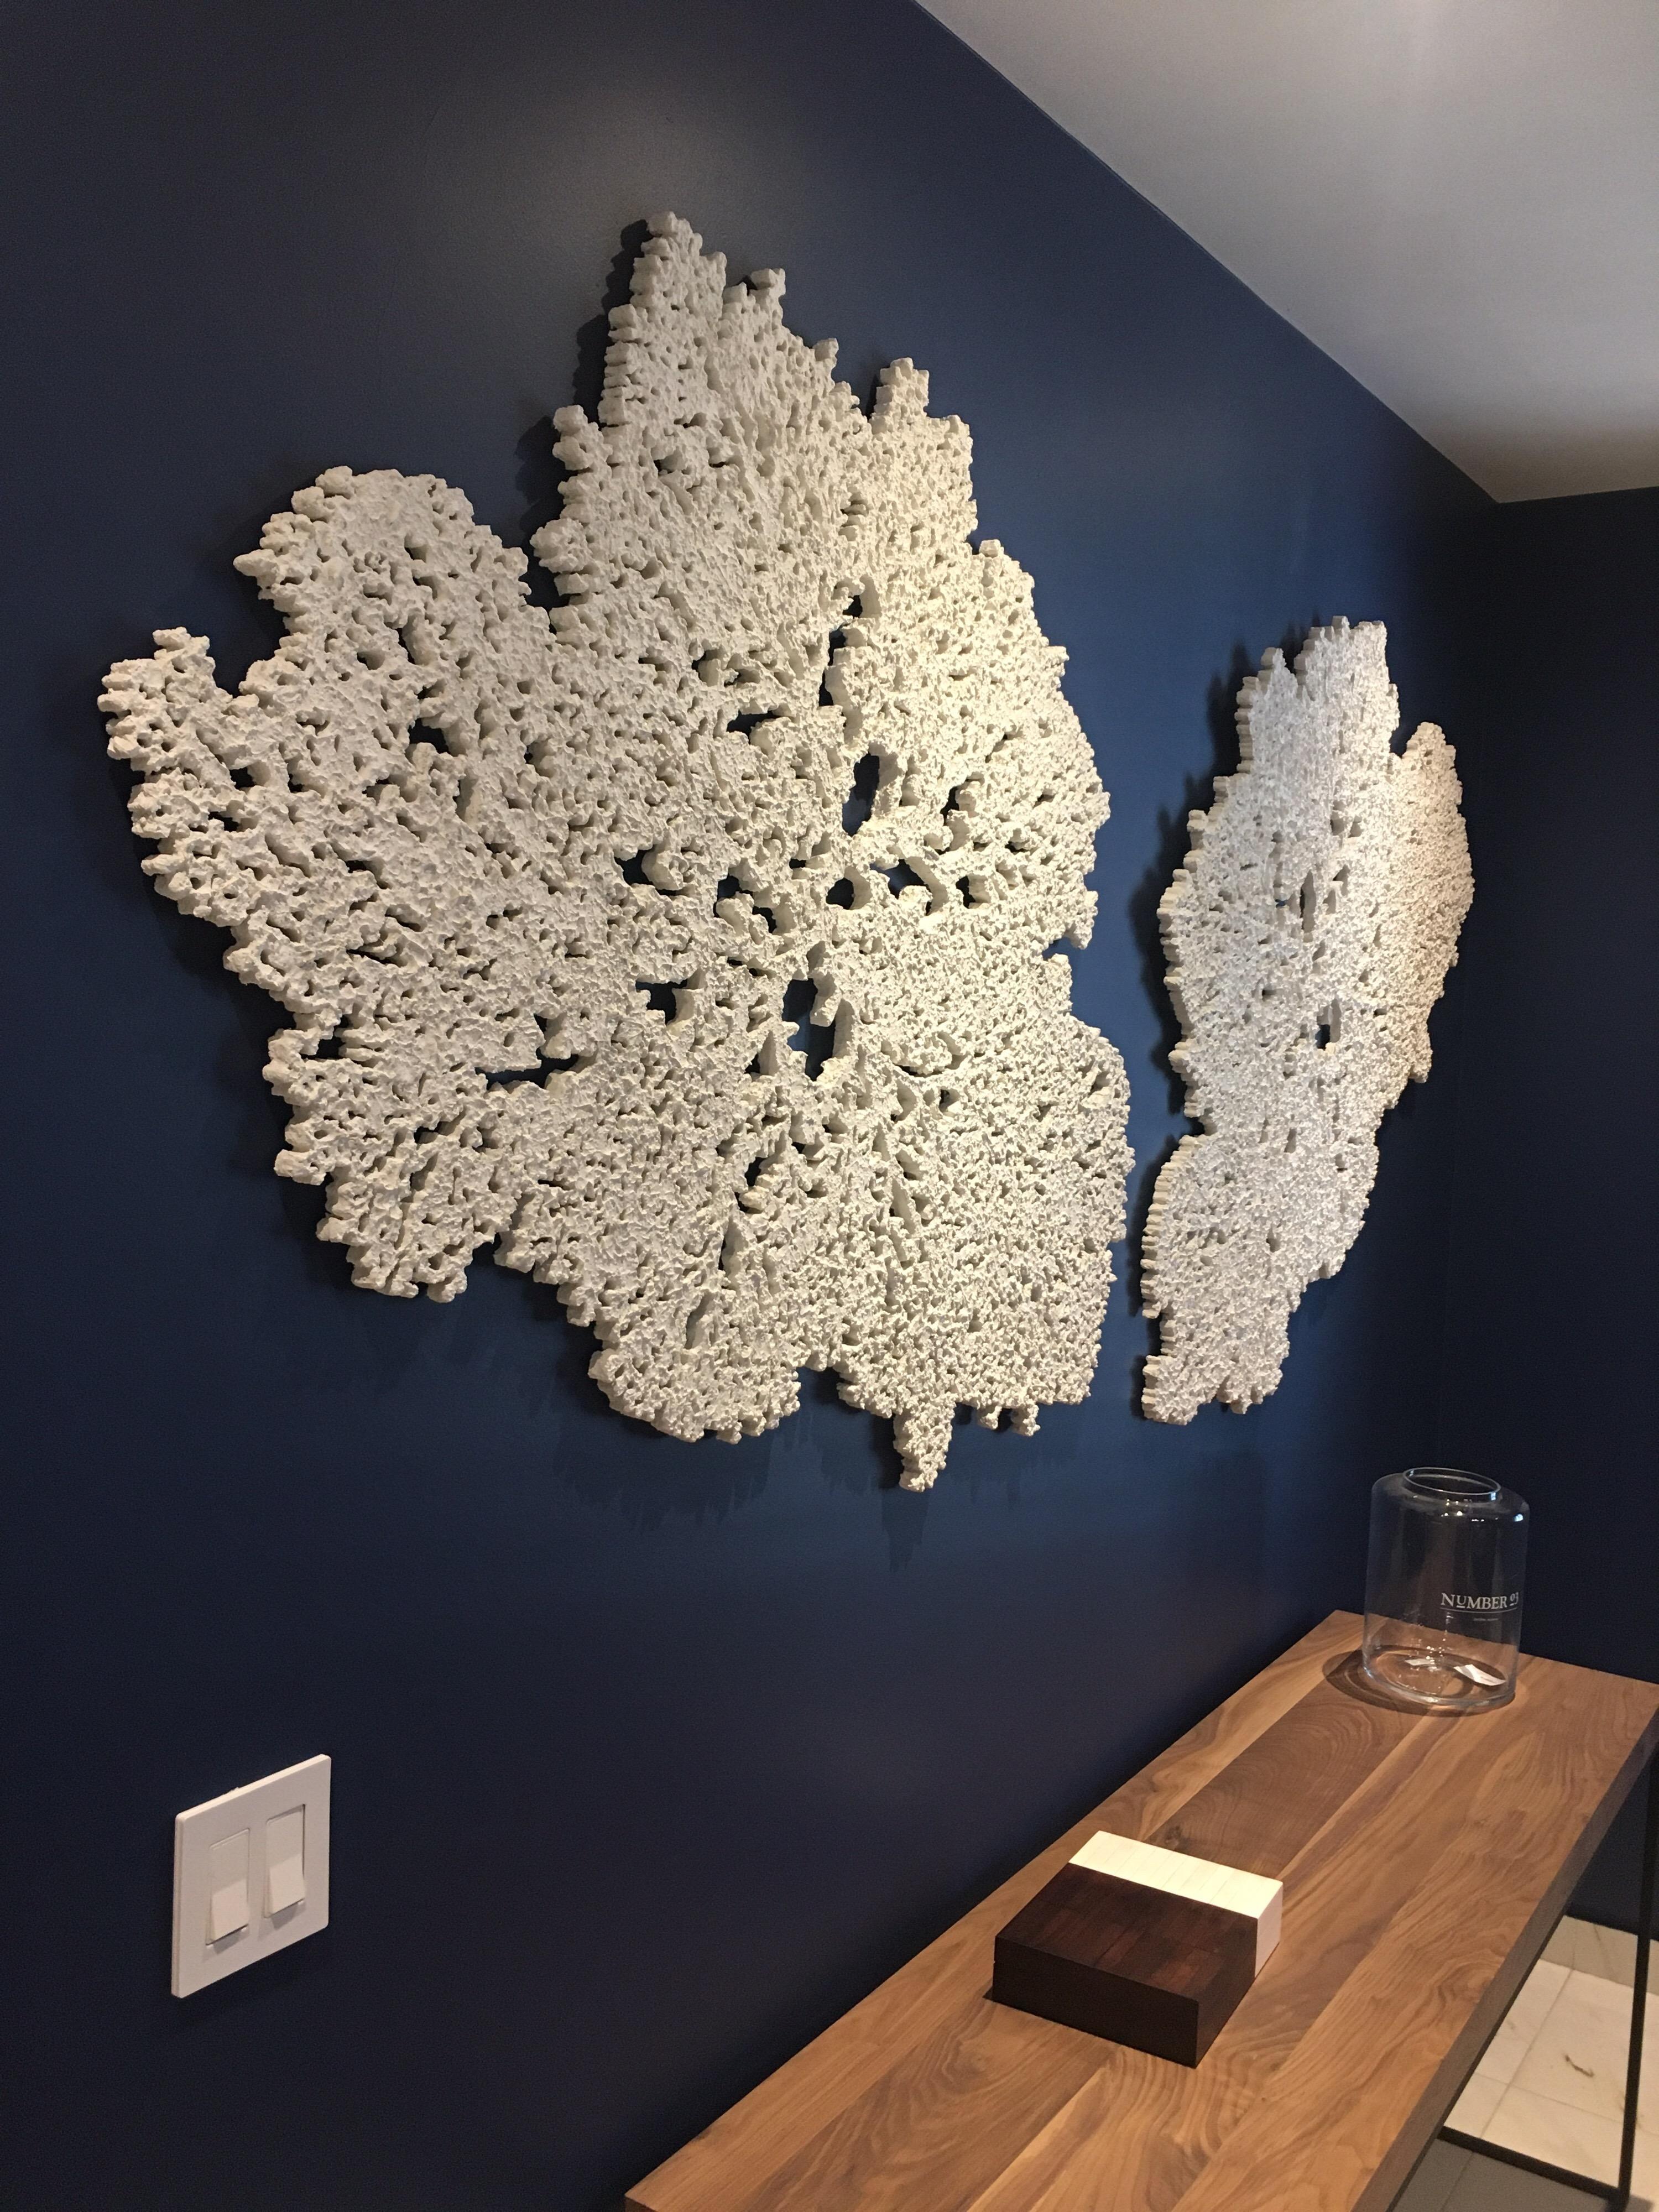 "Coral Ocean" Hand Made-Unique Sculpture for Walls. Pulverized Minerals and Sand